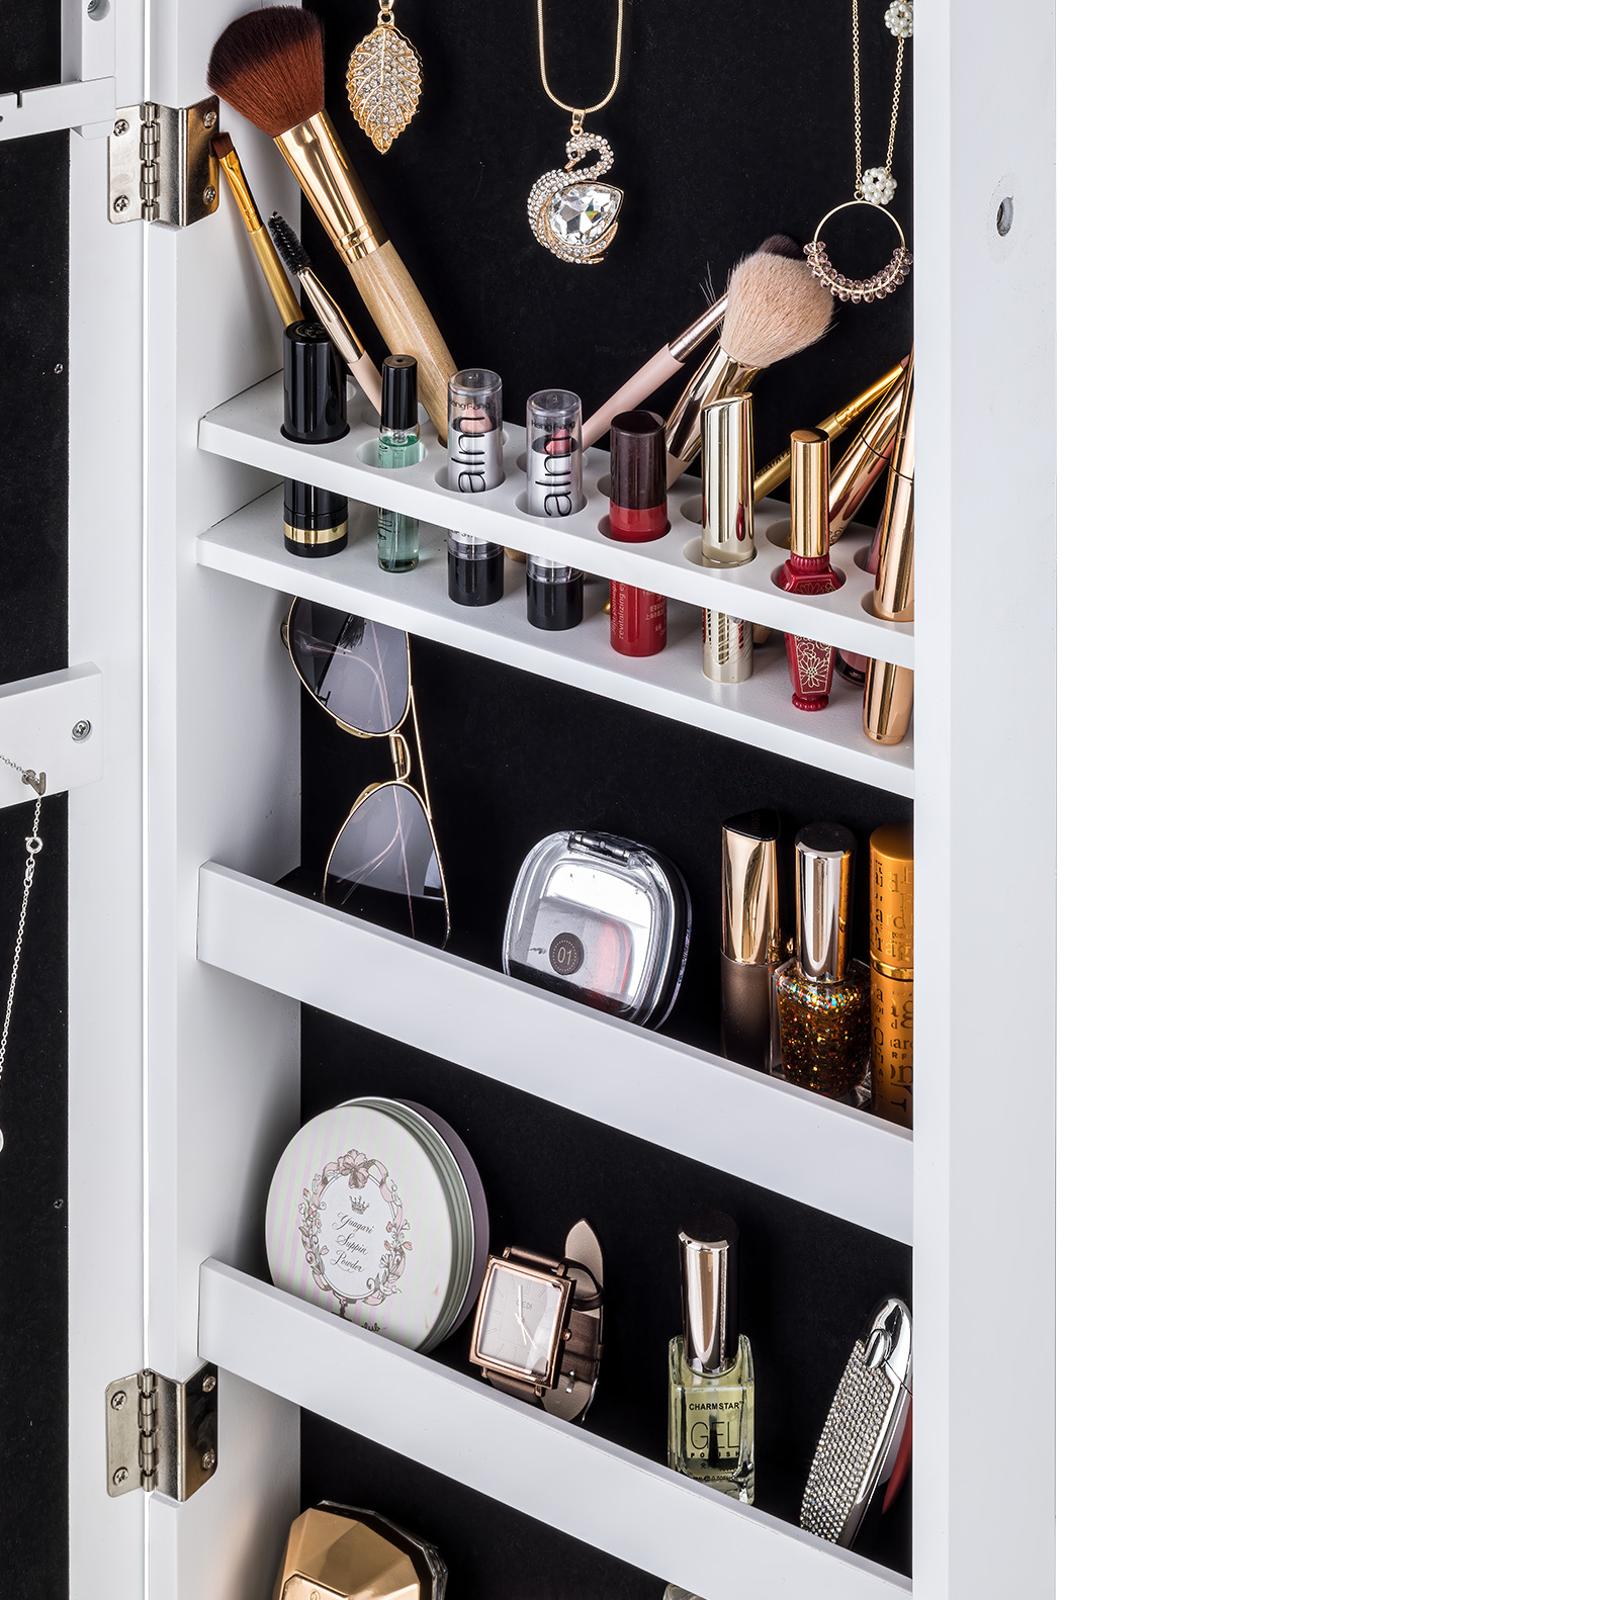 ViscoLogic Emily Touch Operated LED Jewelry Armoire Makeup Mirror Storage Cabinet for Cosmetics, Jewelry, Lockable Cabinet and Organizer With Full Length Mirror (White)